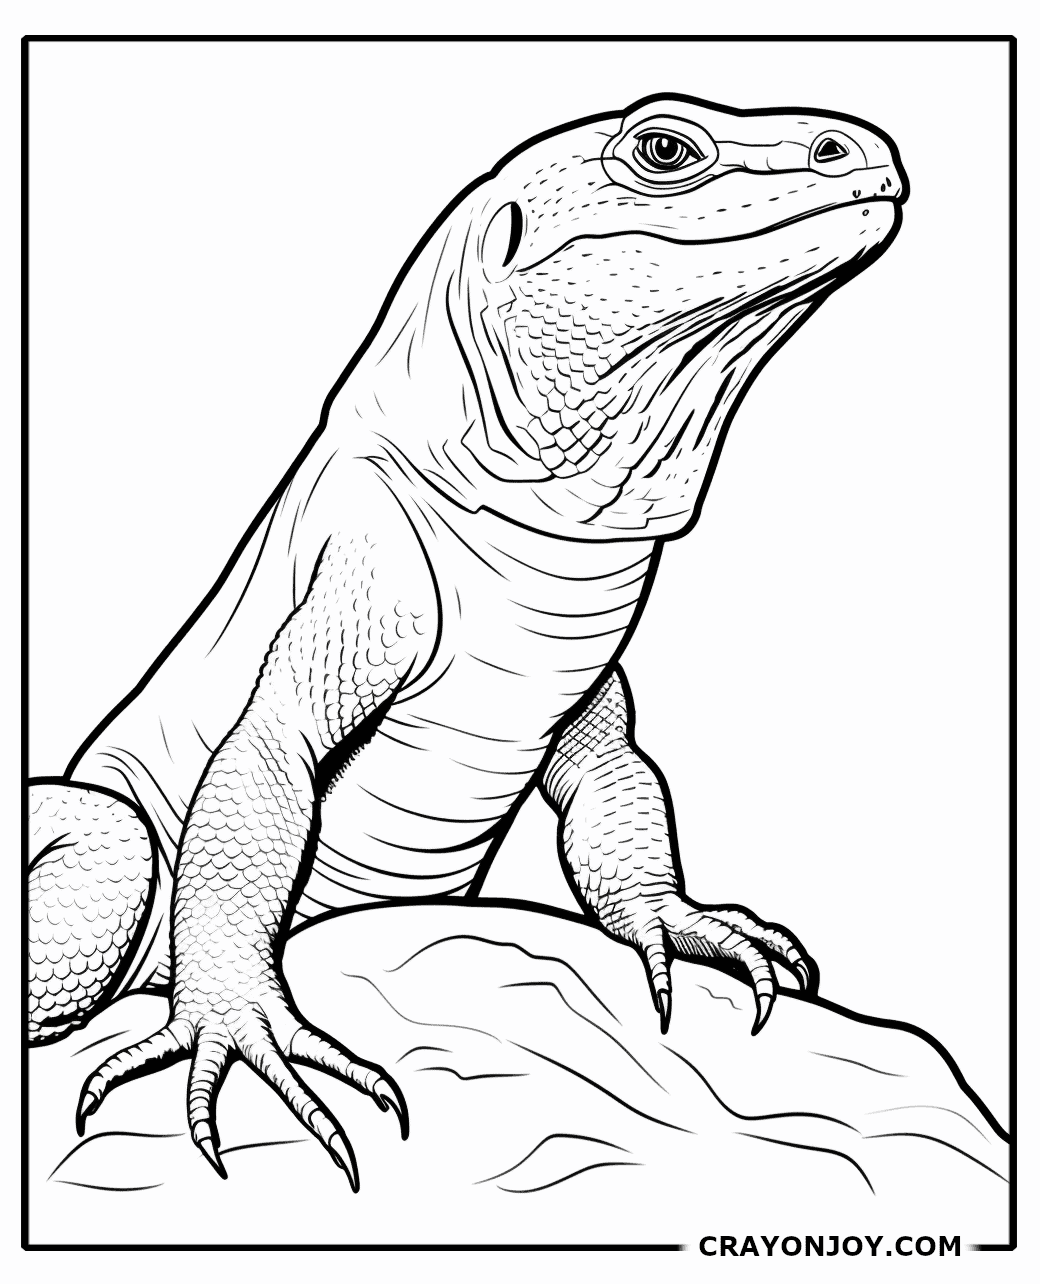 Free Printable Monitor Lizard Coloring Pages for Kids & Adults